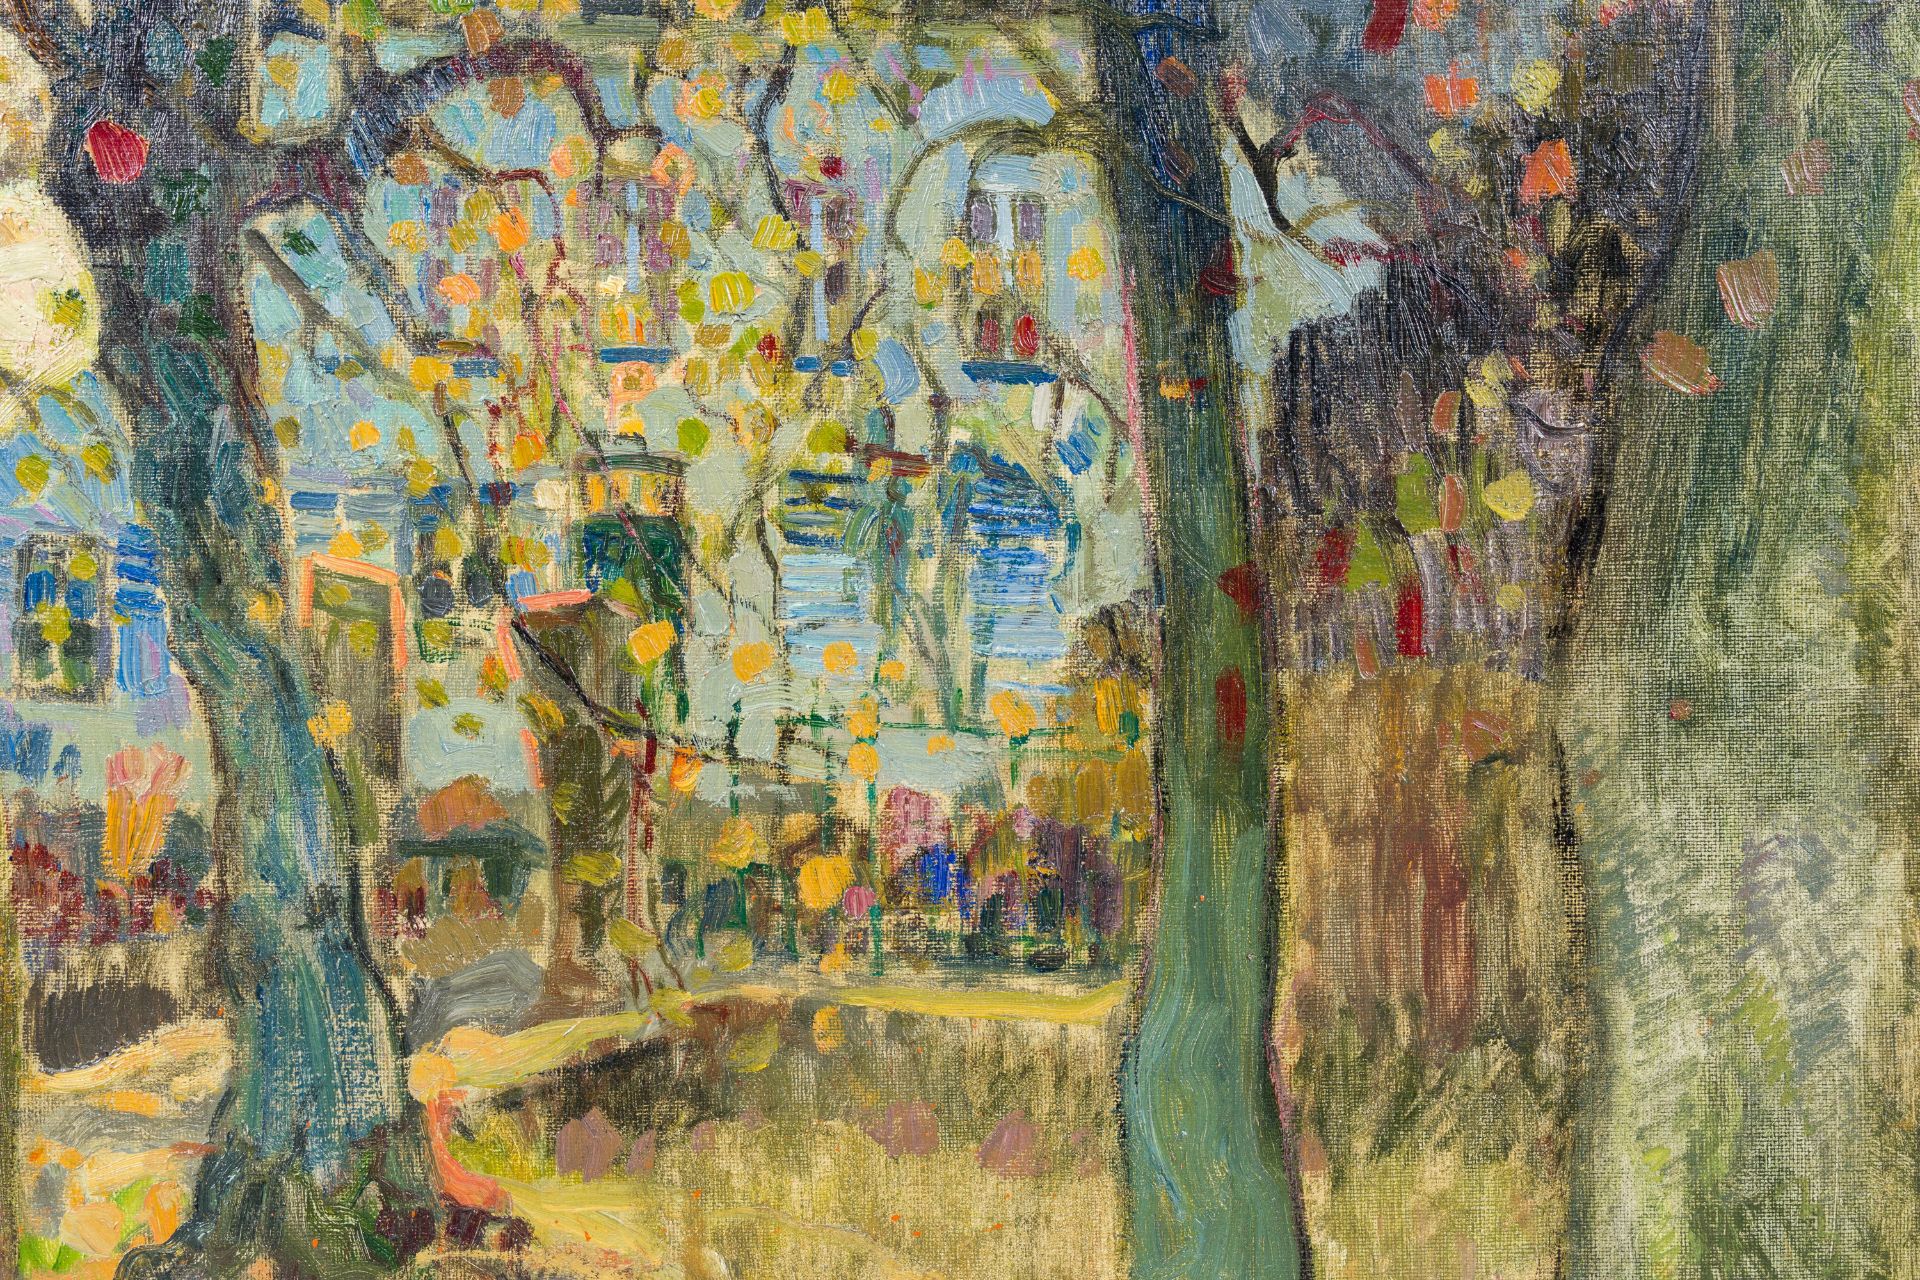 Albert Saverys (1886-1964): Presbytery in Bachte-Maria-Leerne, oil on canvas - Image 5 of 5